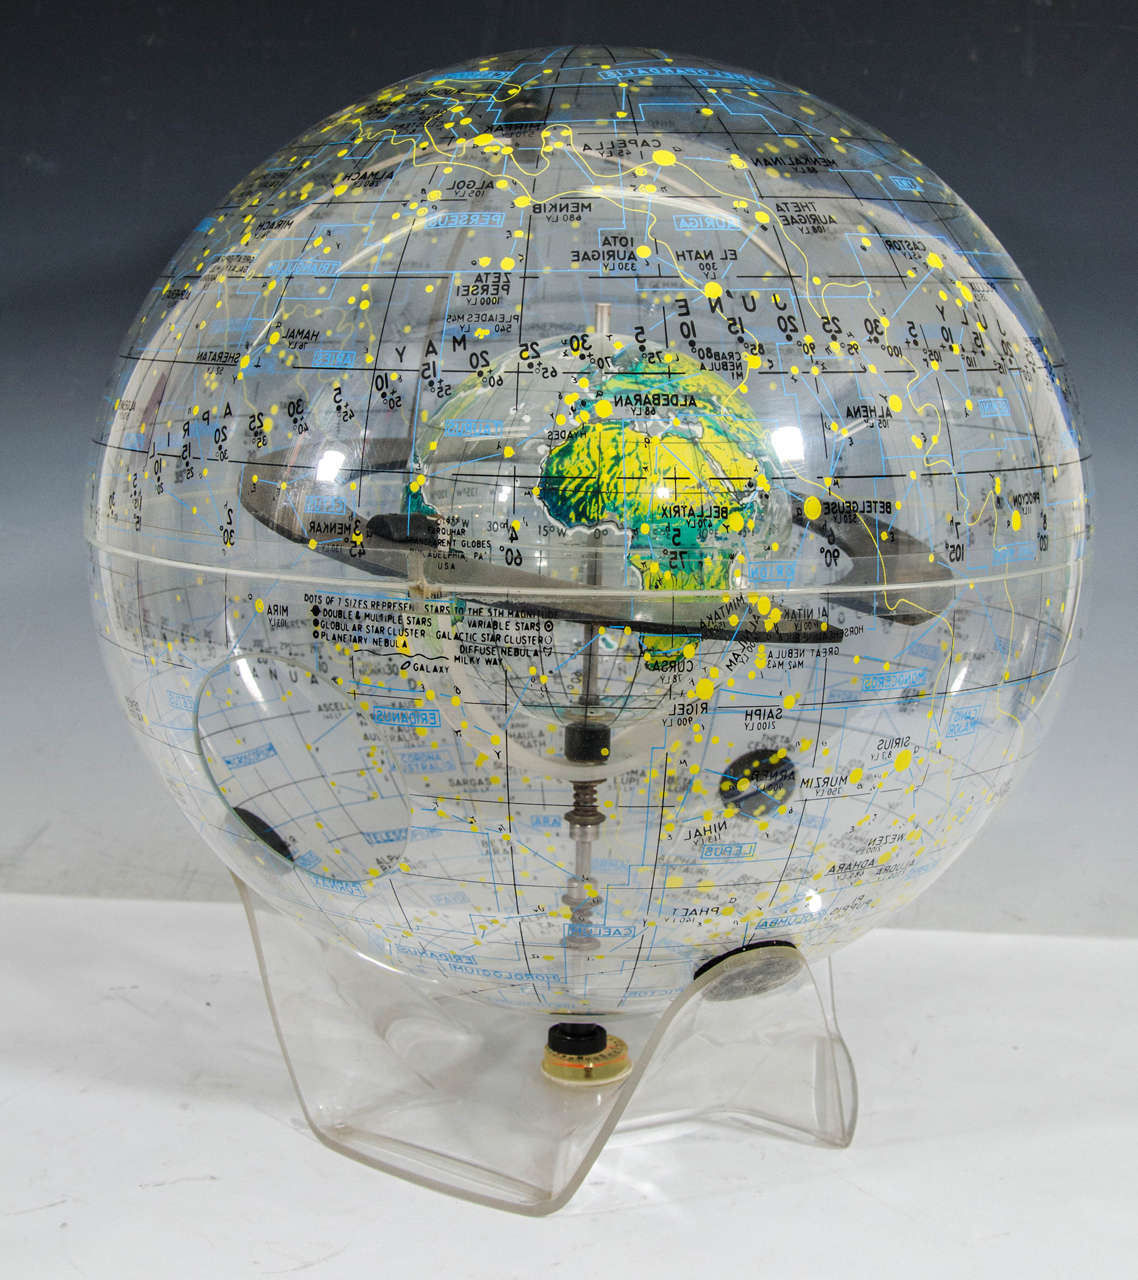 A vintage transparent celestial globe with internal terrestrial globe made of plexiglass with a modern base and built-in compass. The globe is dated 1977 and was produced by Robert Farquhar of Philadelphia, PA.